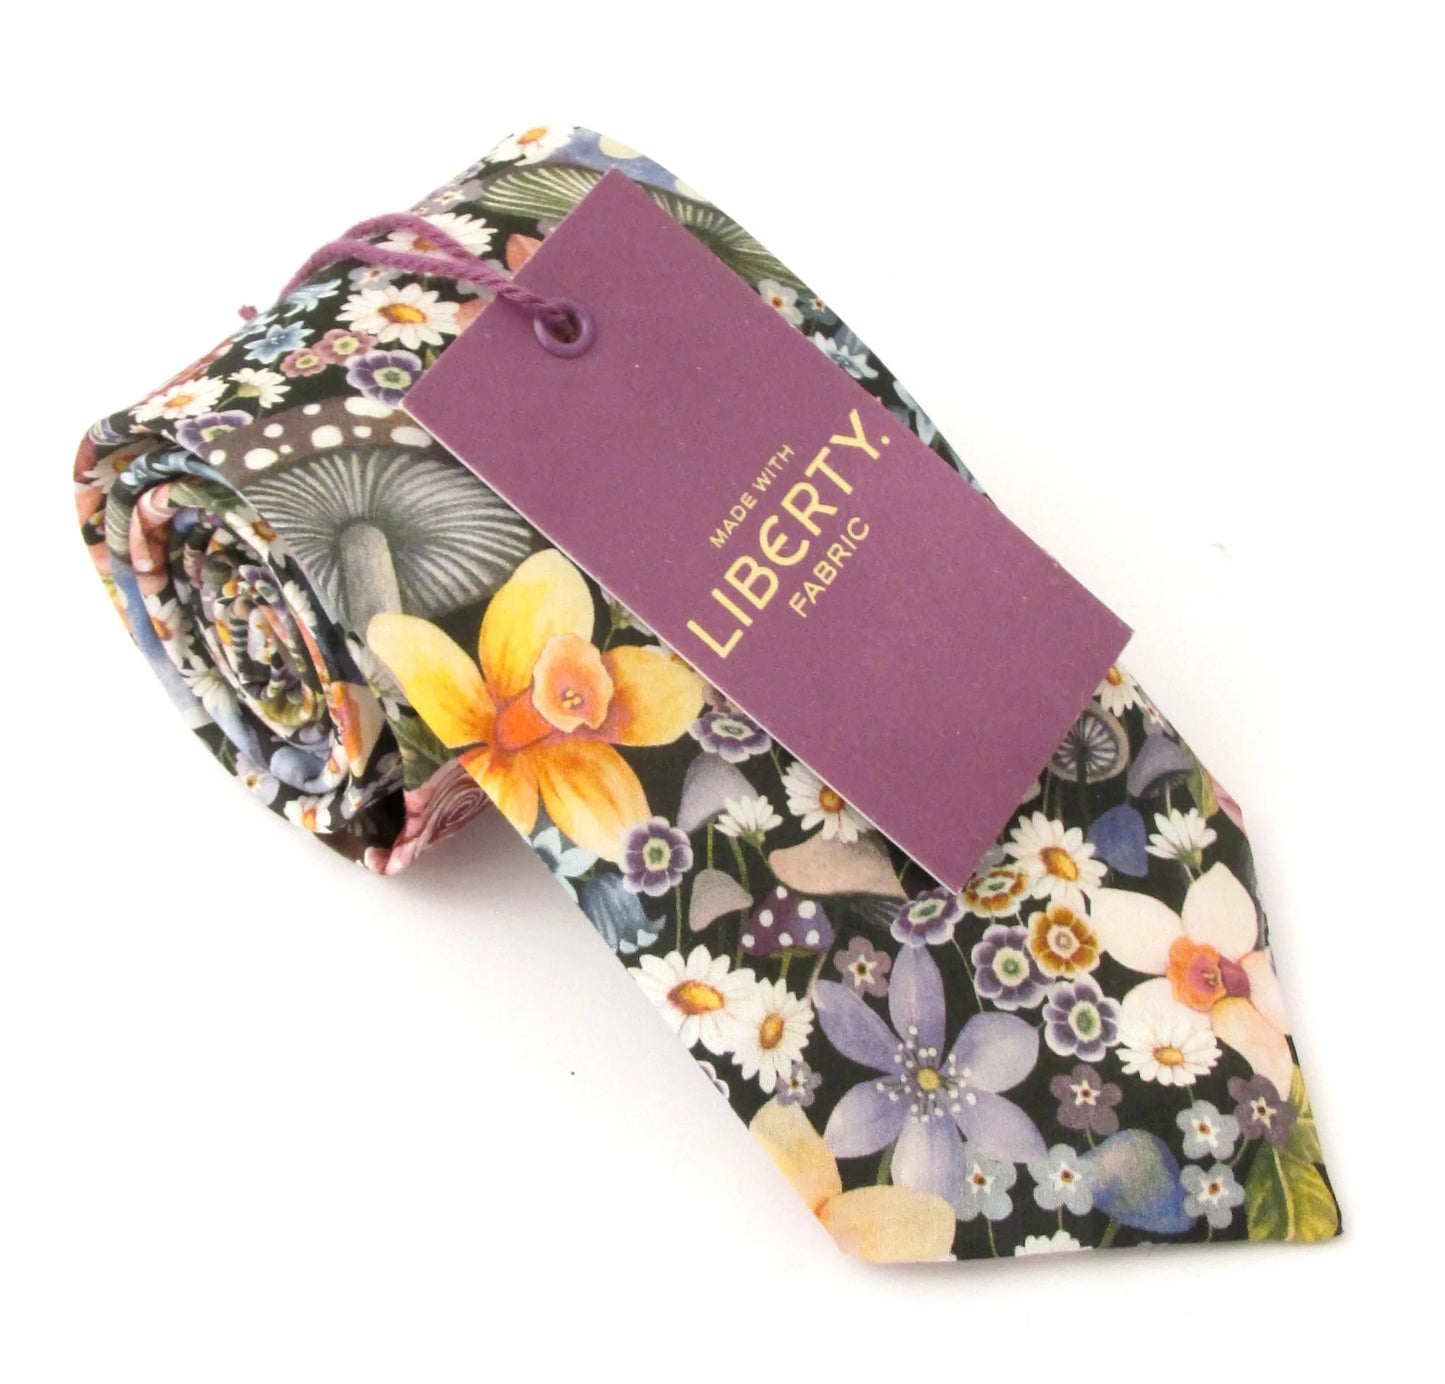 Curious Land in Navy Liberty fabric tie by Van Buck